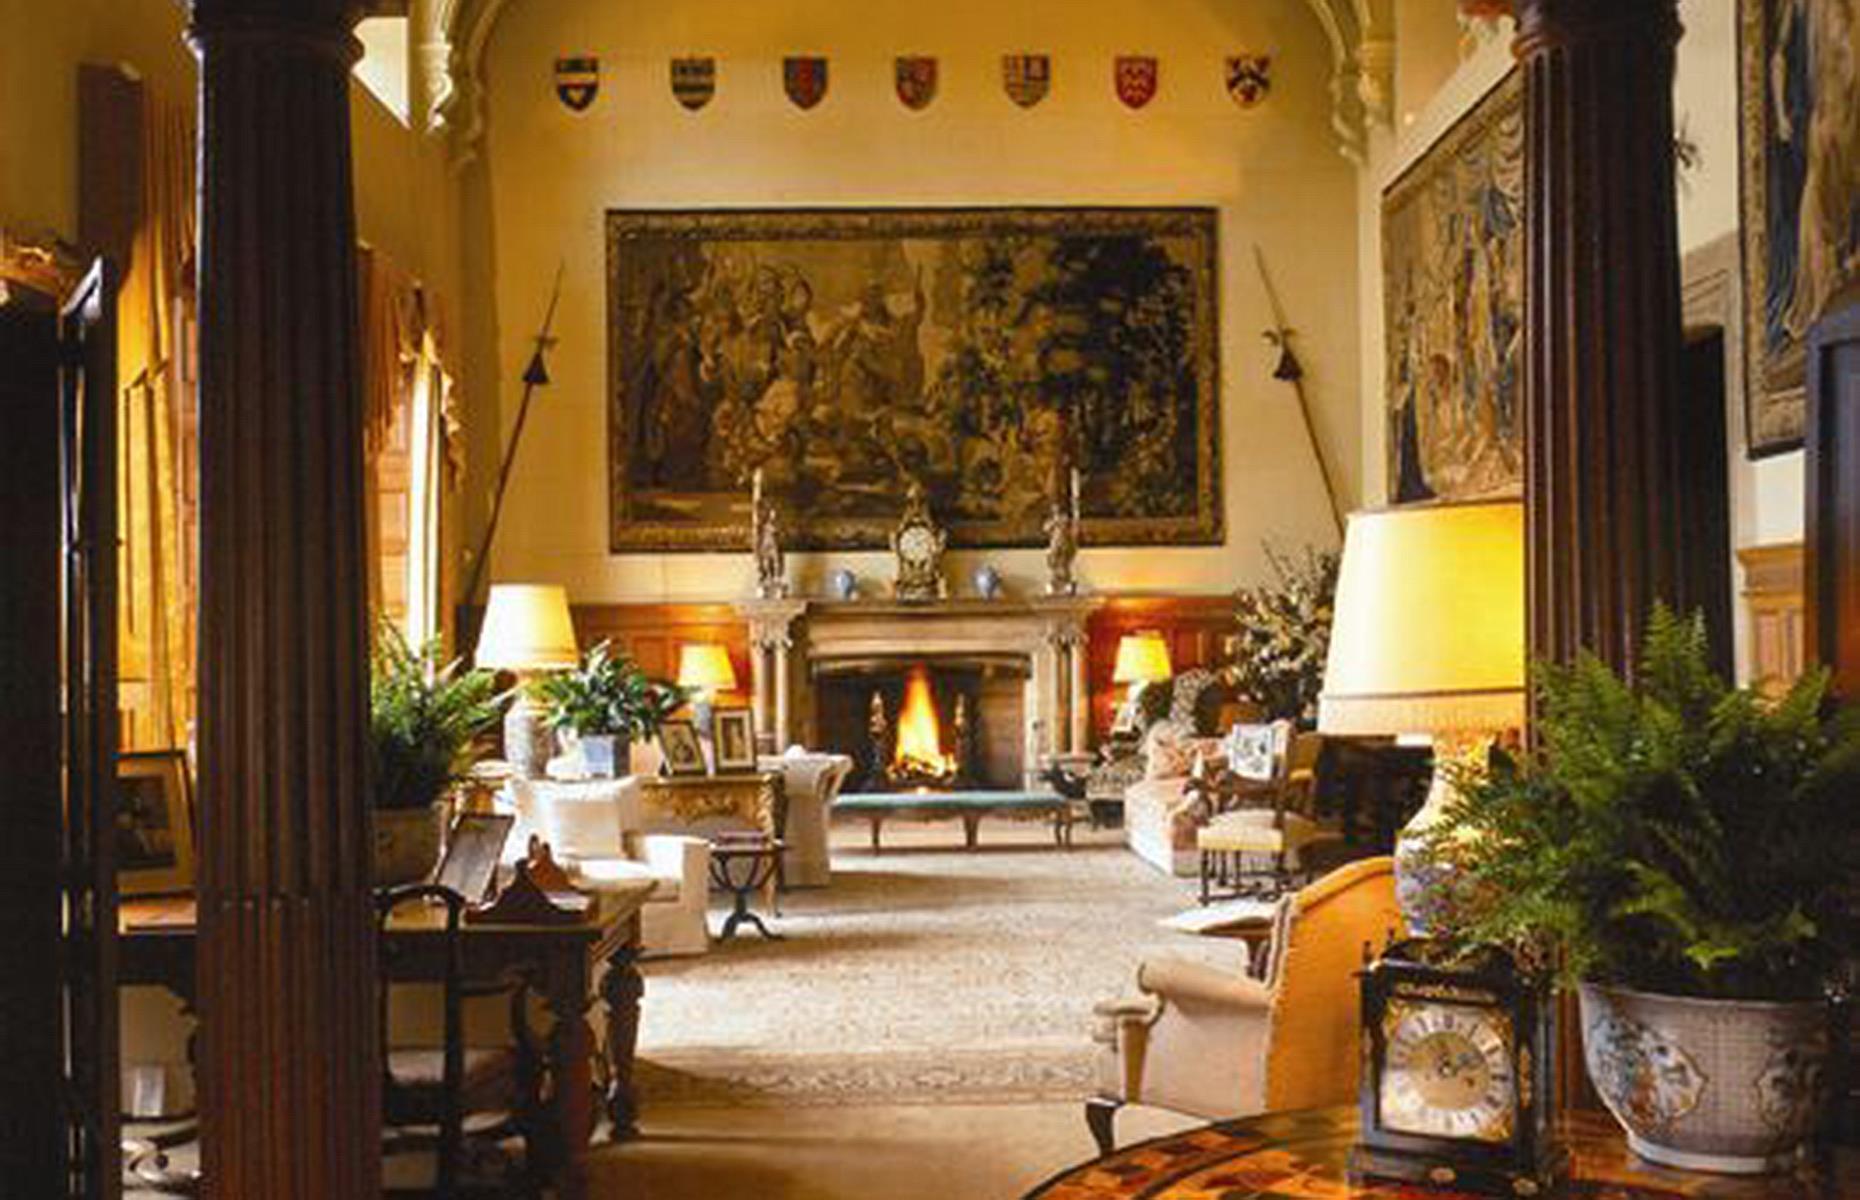 <p>King Edward Vll renovated the house in 1870, adding a ballroom in 1881 and a guest wing in the 1890s. Described as “the most comfortable house in England,” it featured the latest domestic technology, including gas lighting, flushing toilets and working showers.</p>  <p>Even today, Sandringham has a more relaxed vibe than other royal residences. The ground floor is decorated in elegant Edwardian style with a roaring hearth taking center stage in the saloon seen here.</p>